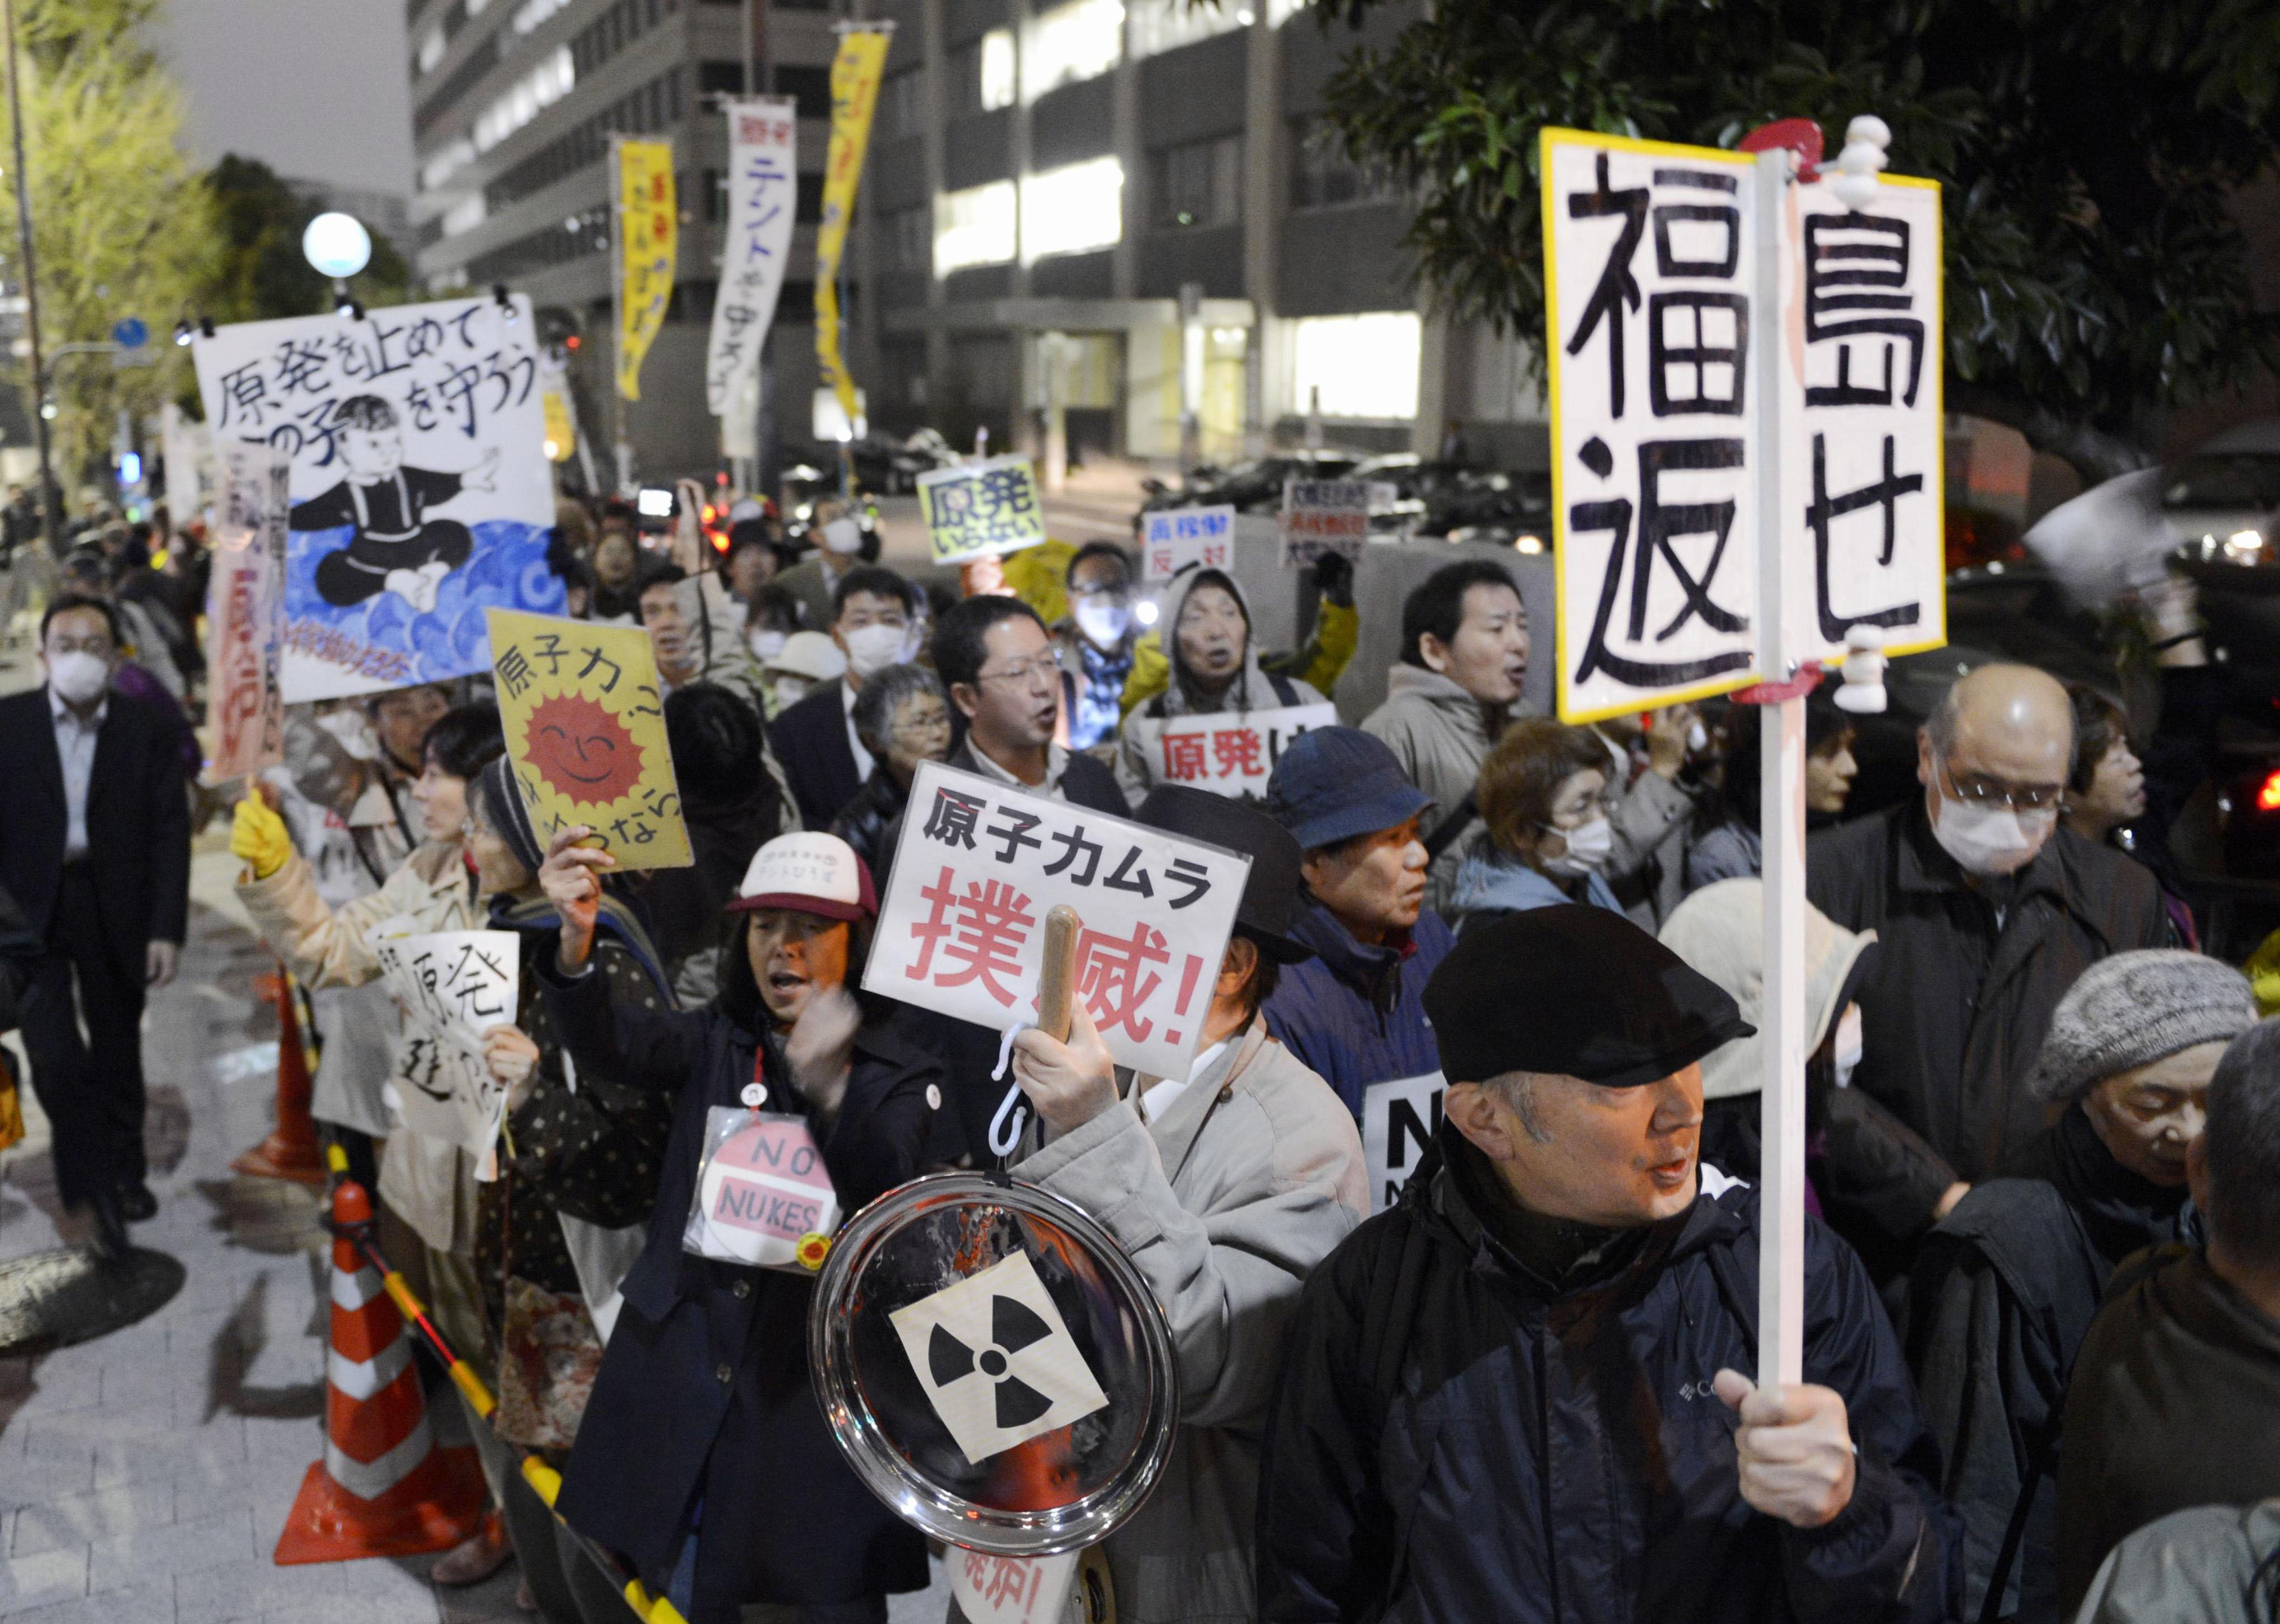 Undeterred: Participants march through Tokyo's Nagata-cho political hub Friday evening urging the government to abandon nuclear power, continuing a weekly demonstration that has lasted a year. | KYODO